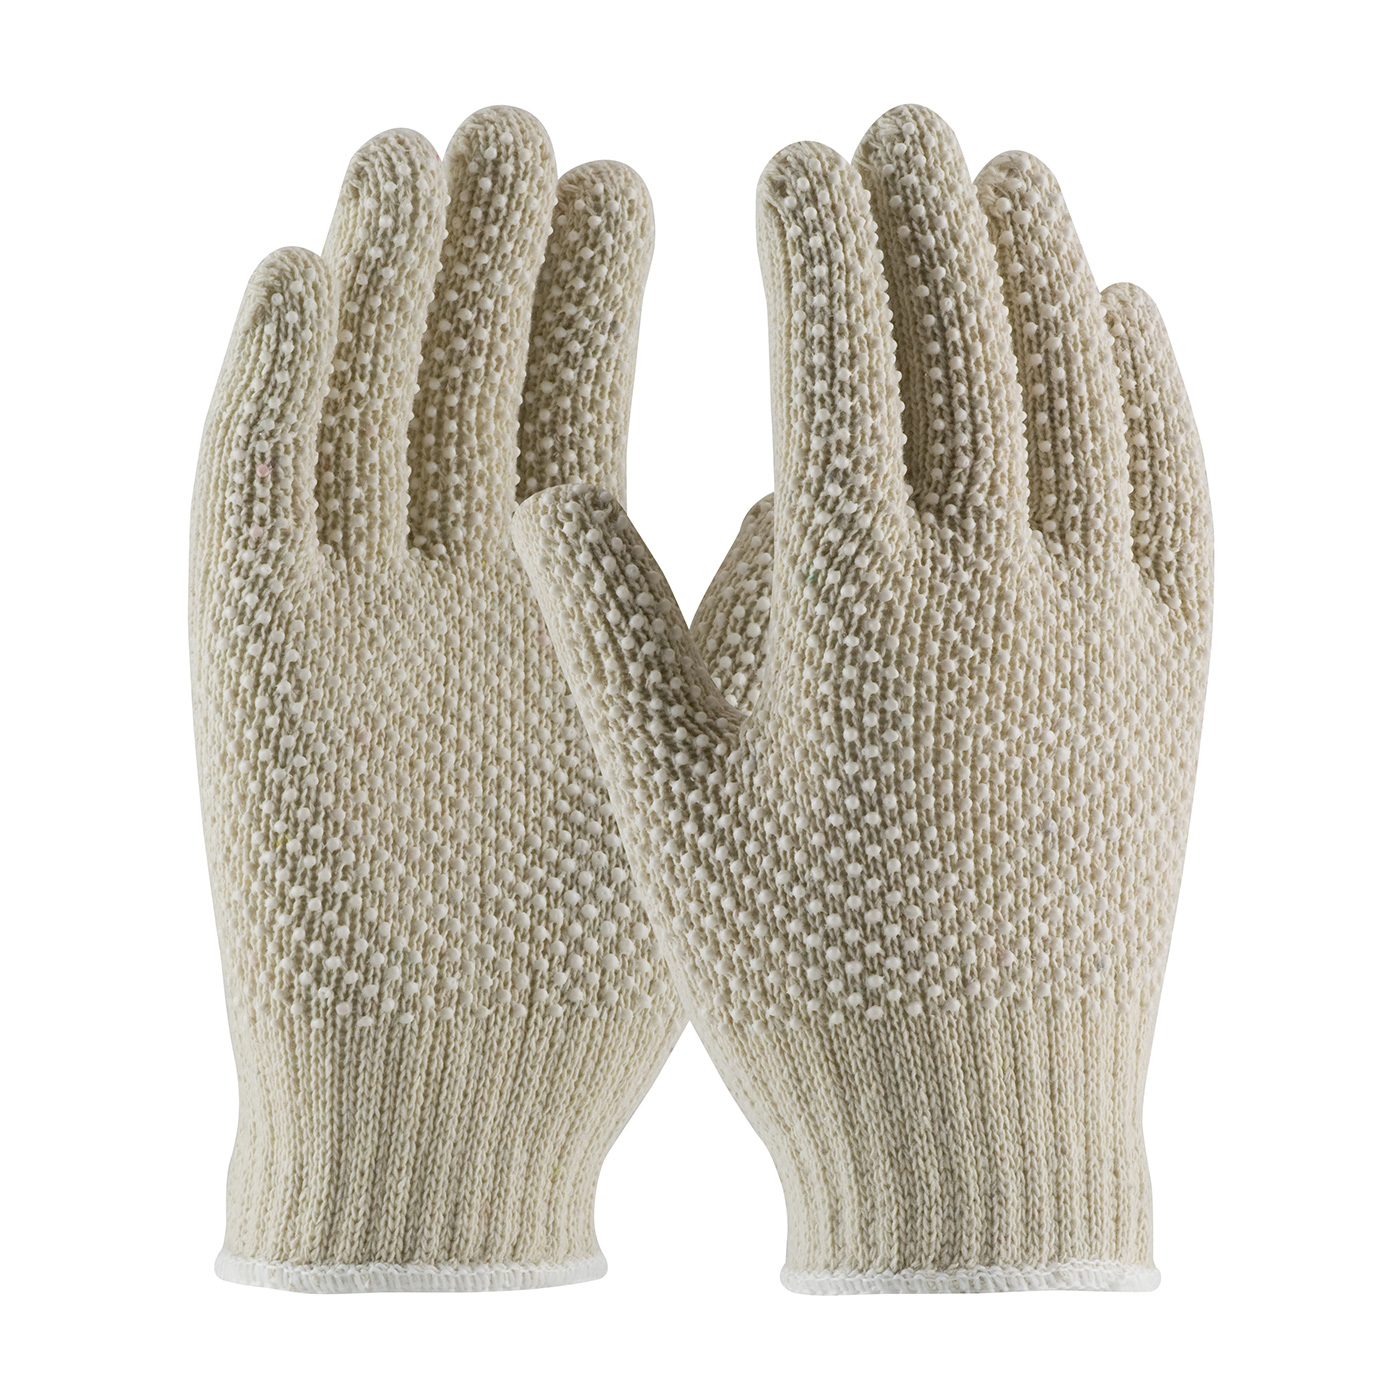 PIP® 7 Gauge Regular Weight Seamless Knit Cotton / Polyester Glove with Double-Sided PVC Dot Grip -  #36-110PDD-WT